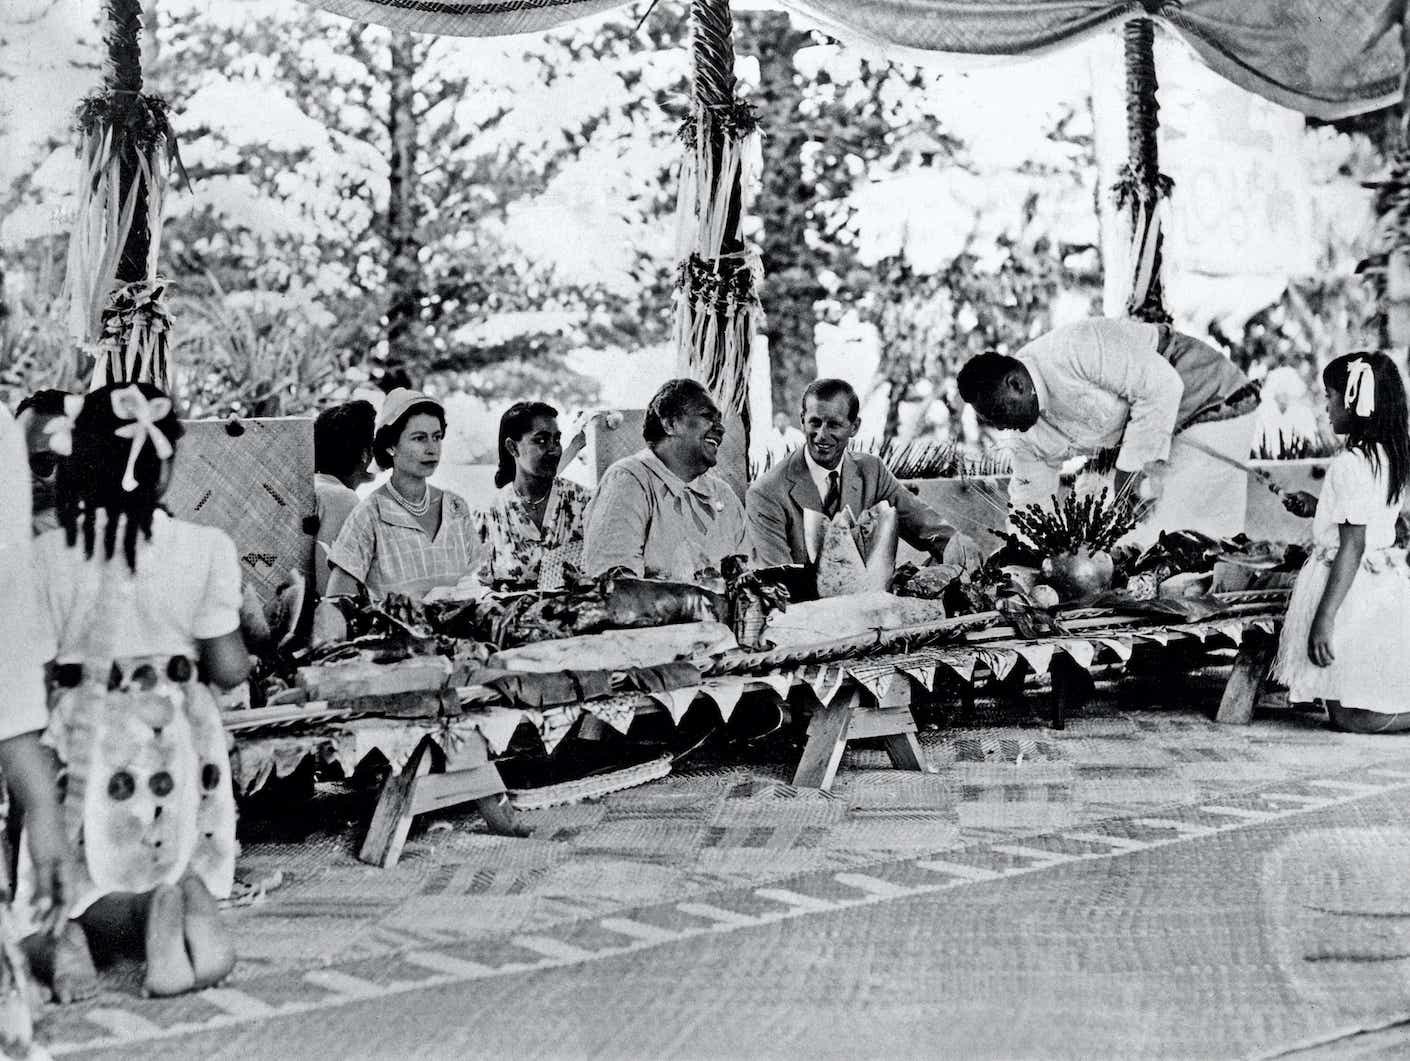 Queen Elizabeth II and Prince Philip with the Queen of Tonga at a feast at which a roasted pig was placed in front of every person, during the Royal Tour of the Commonwealth.